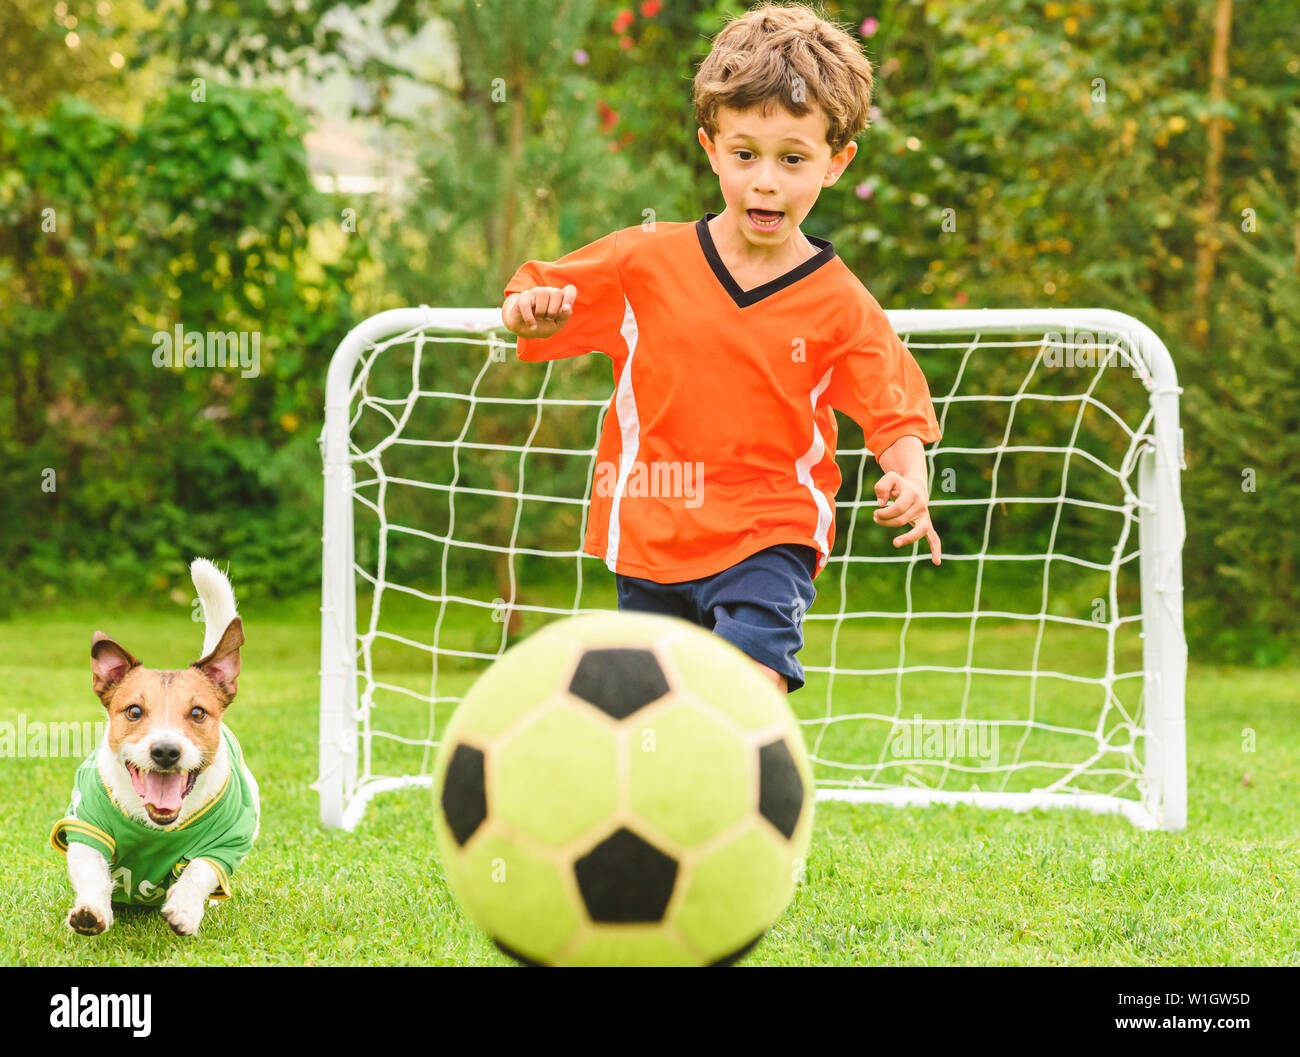 Kid in orange kit and dog chasing football (soccer) ball competing with each other Stock Photo